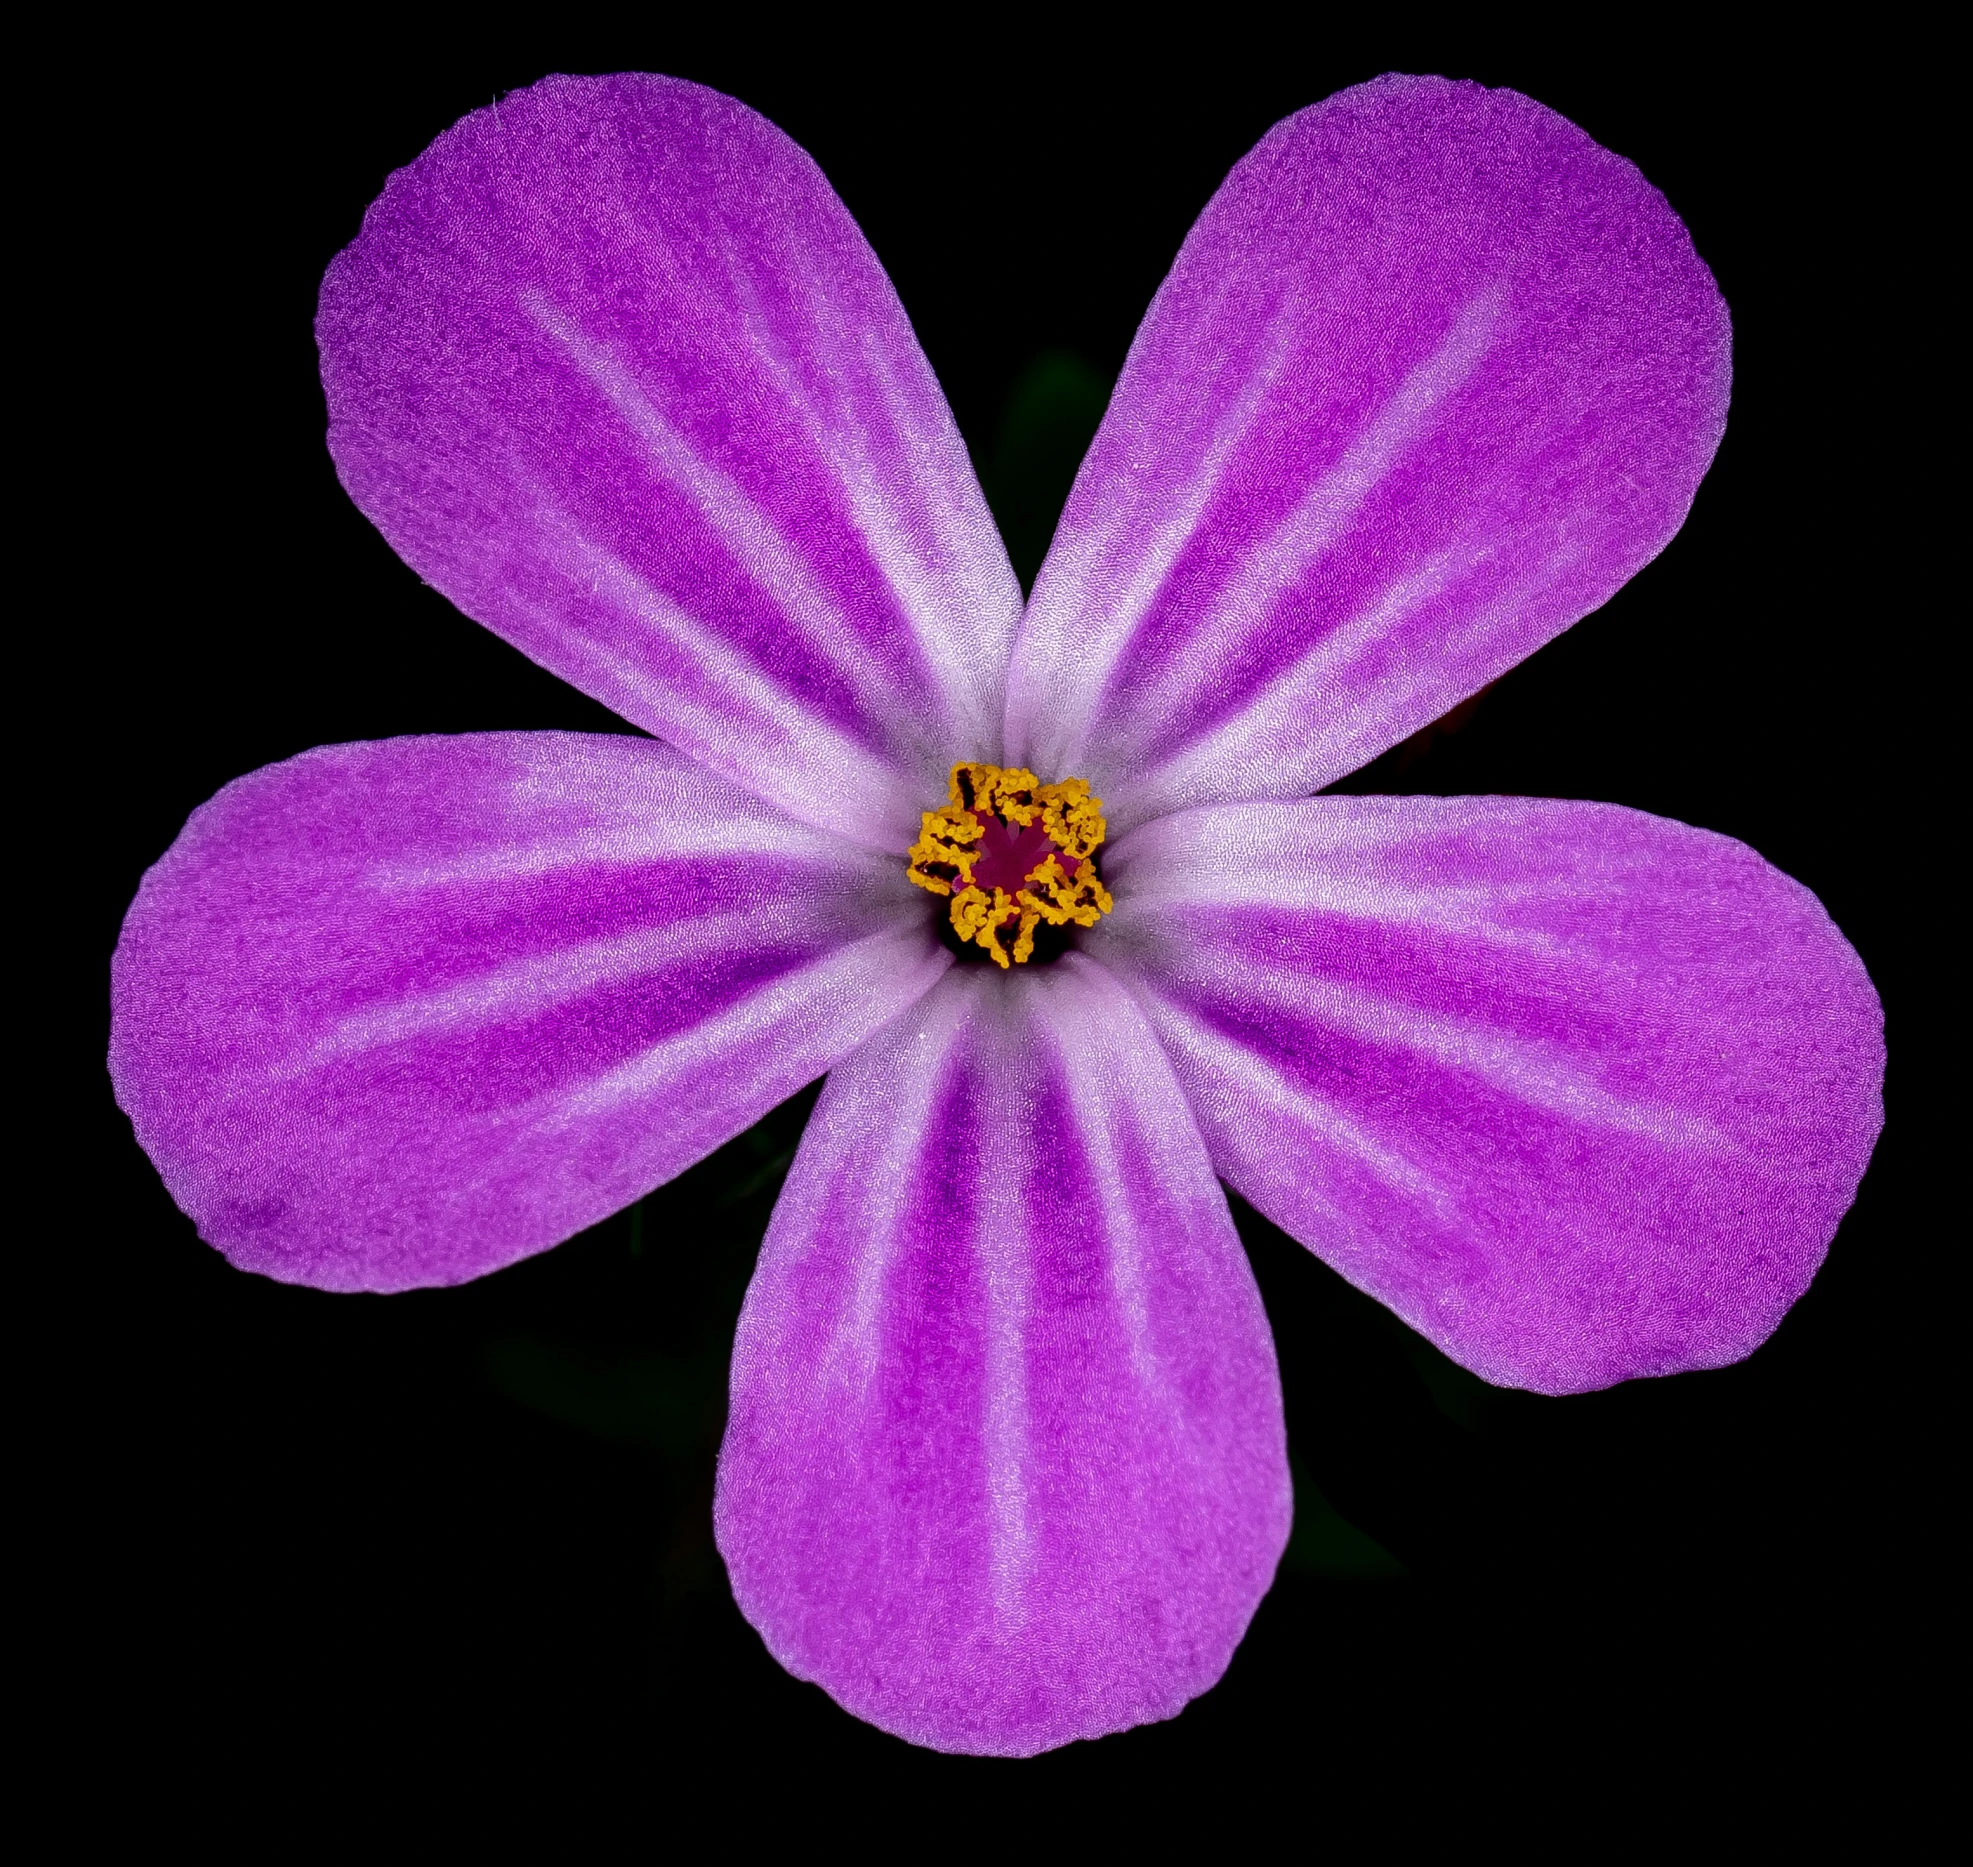 a purple flower is pictured in the center